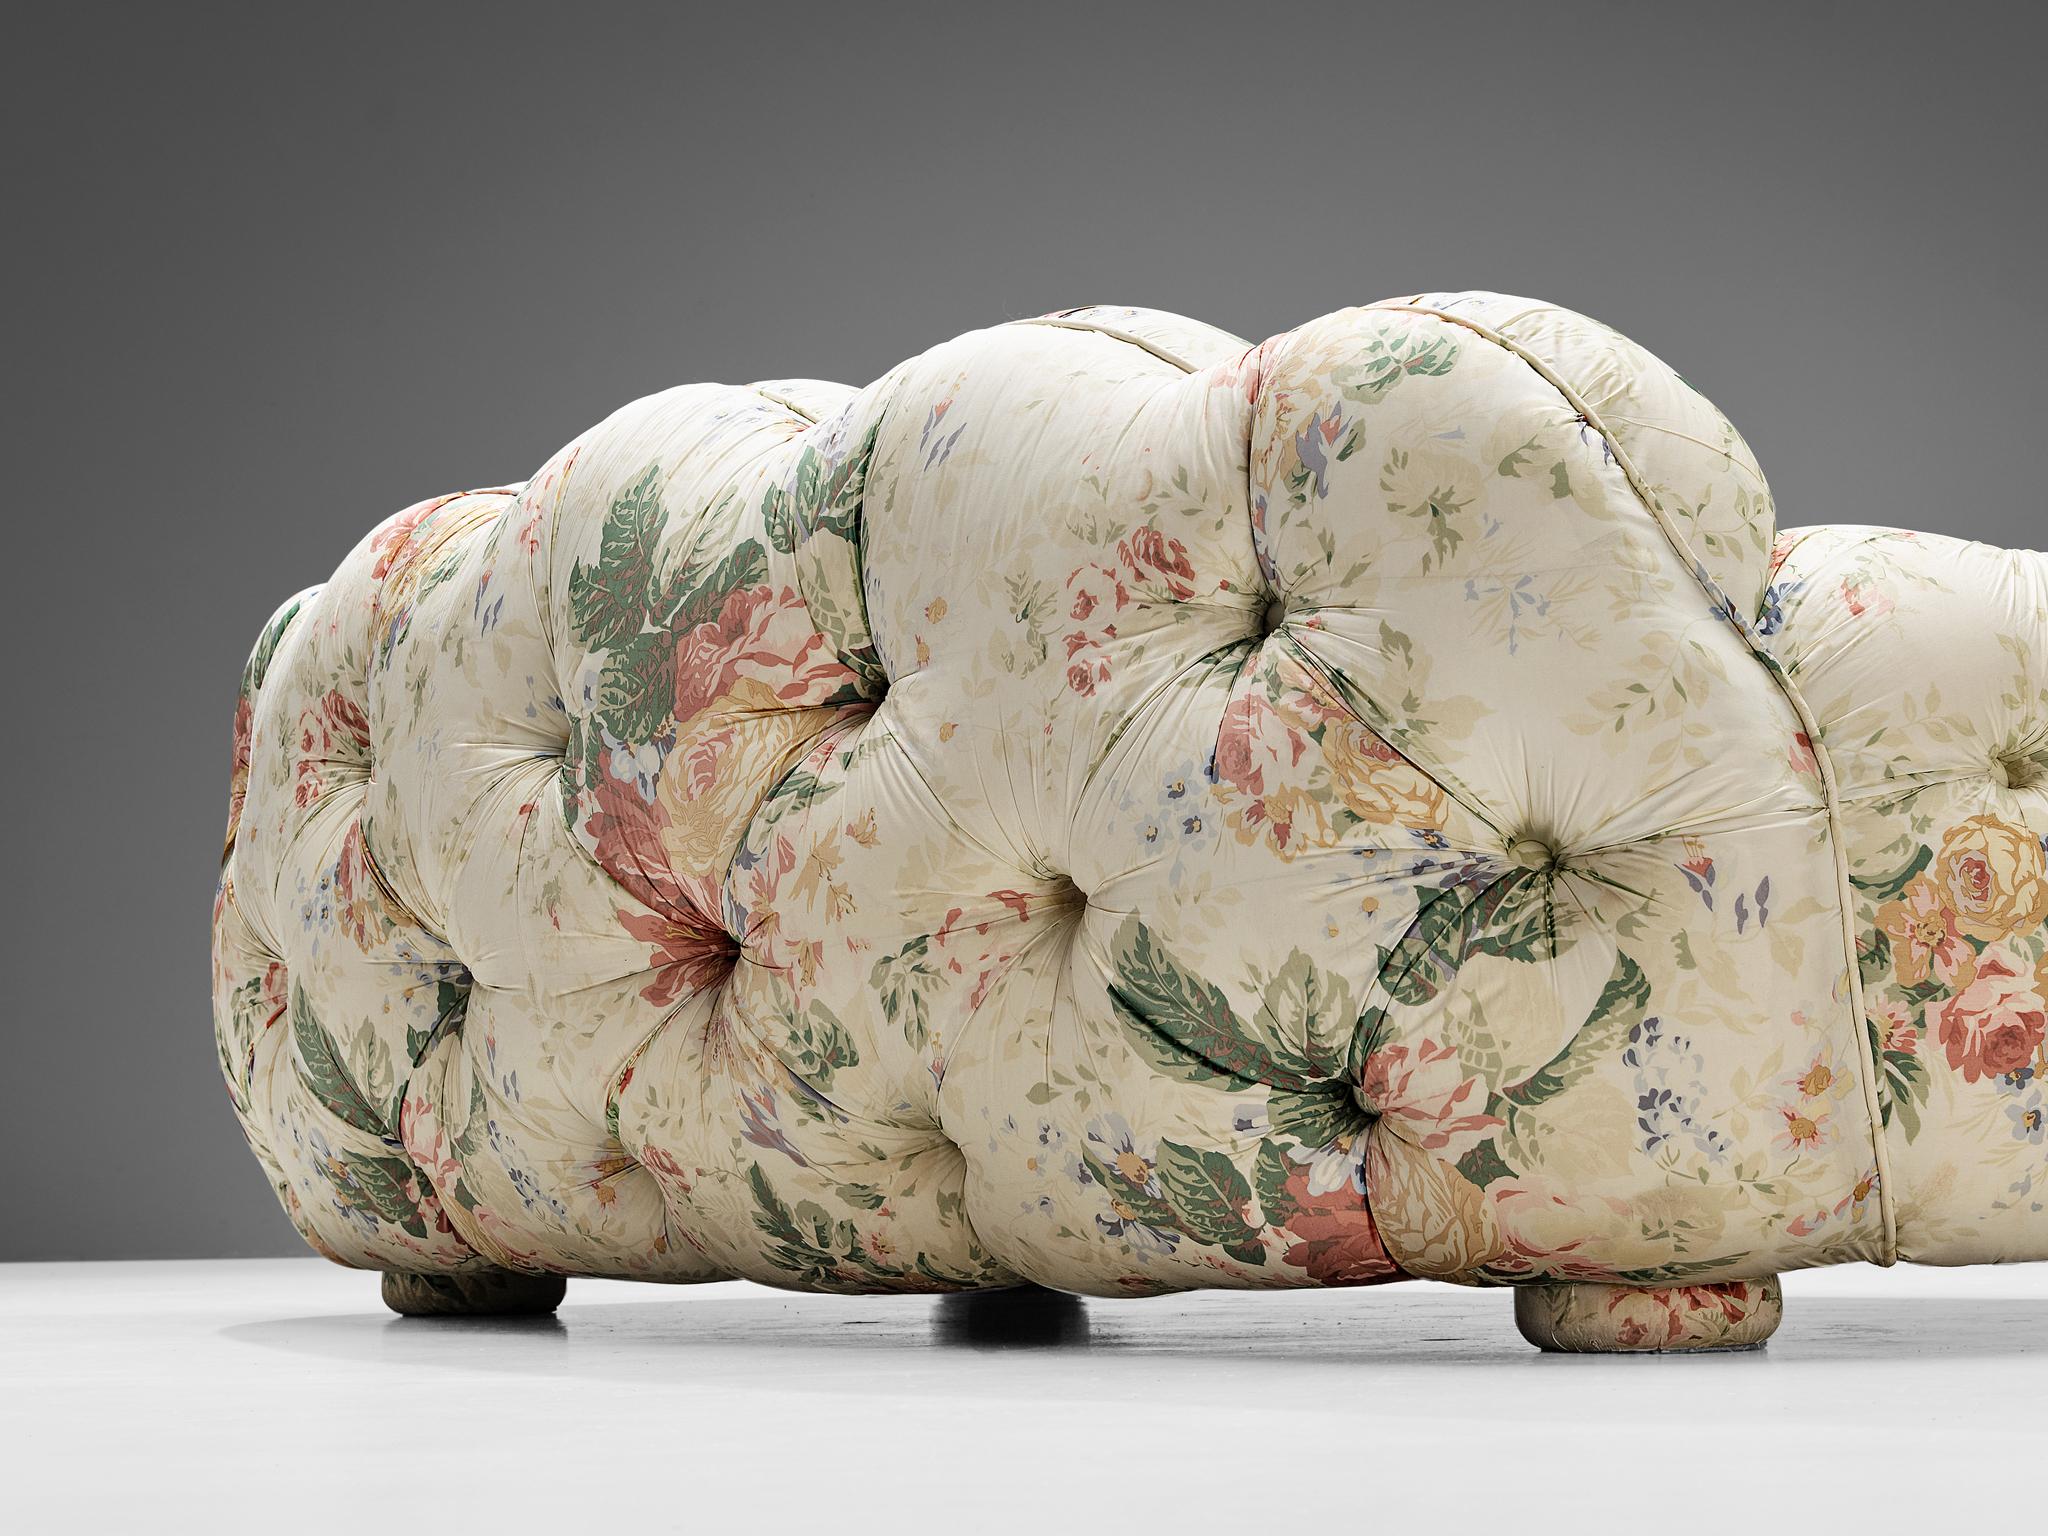 Vivai Del Sud 'Superstar' Sofa in Floral Upholstery 1